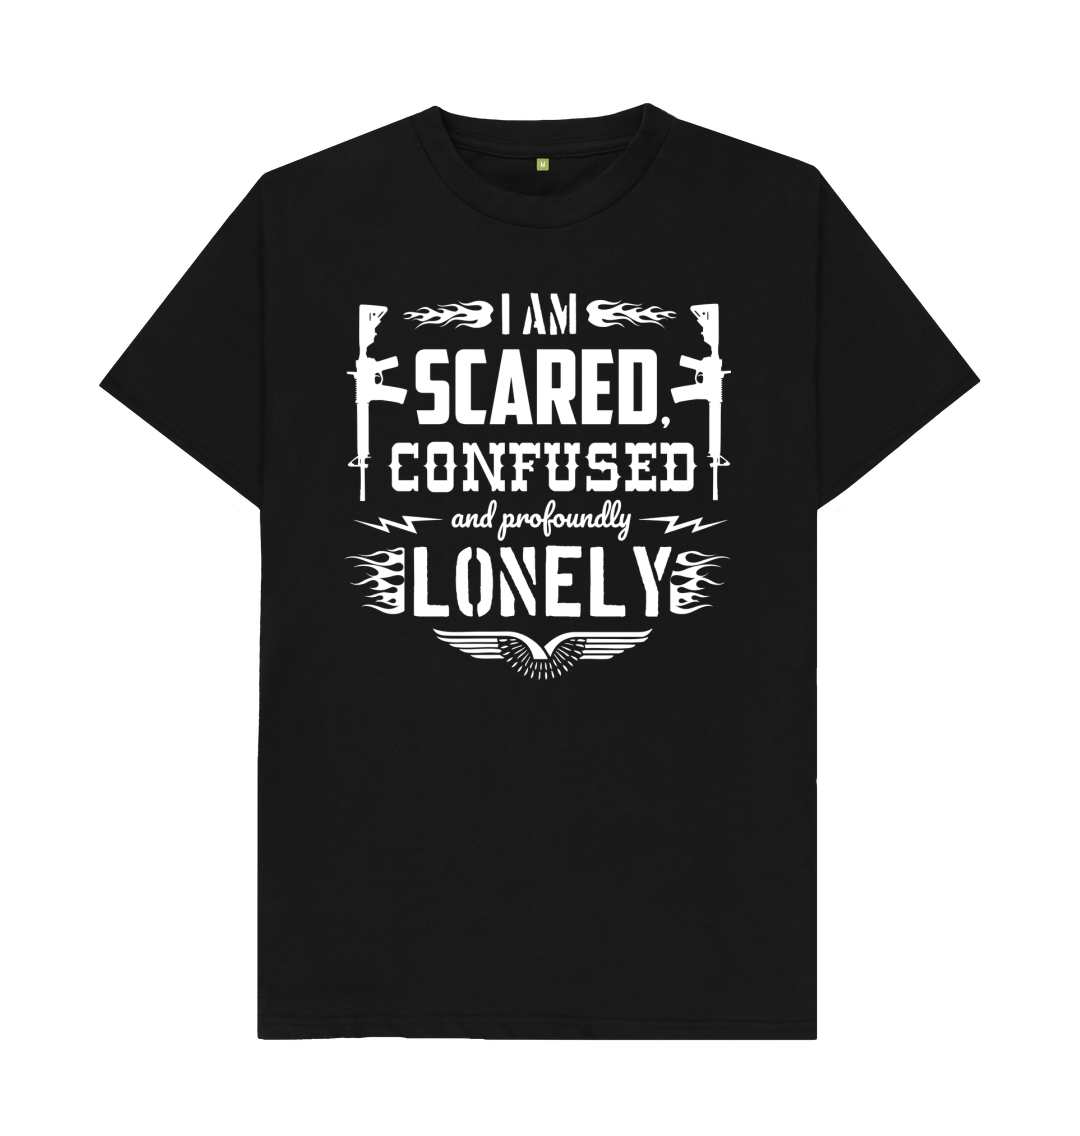 (Hypermasculine T-shirt design with guns, flames and military symbols. The text reads \u201cI am scared, confused and profoundly lonely\u201d)